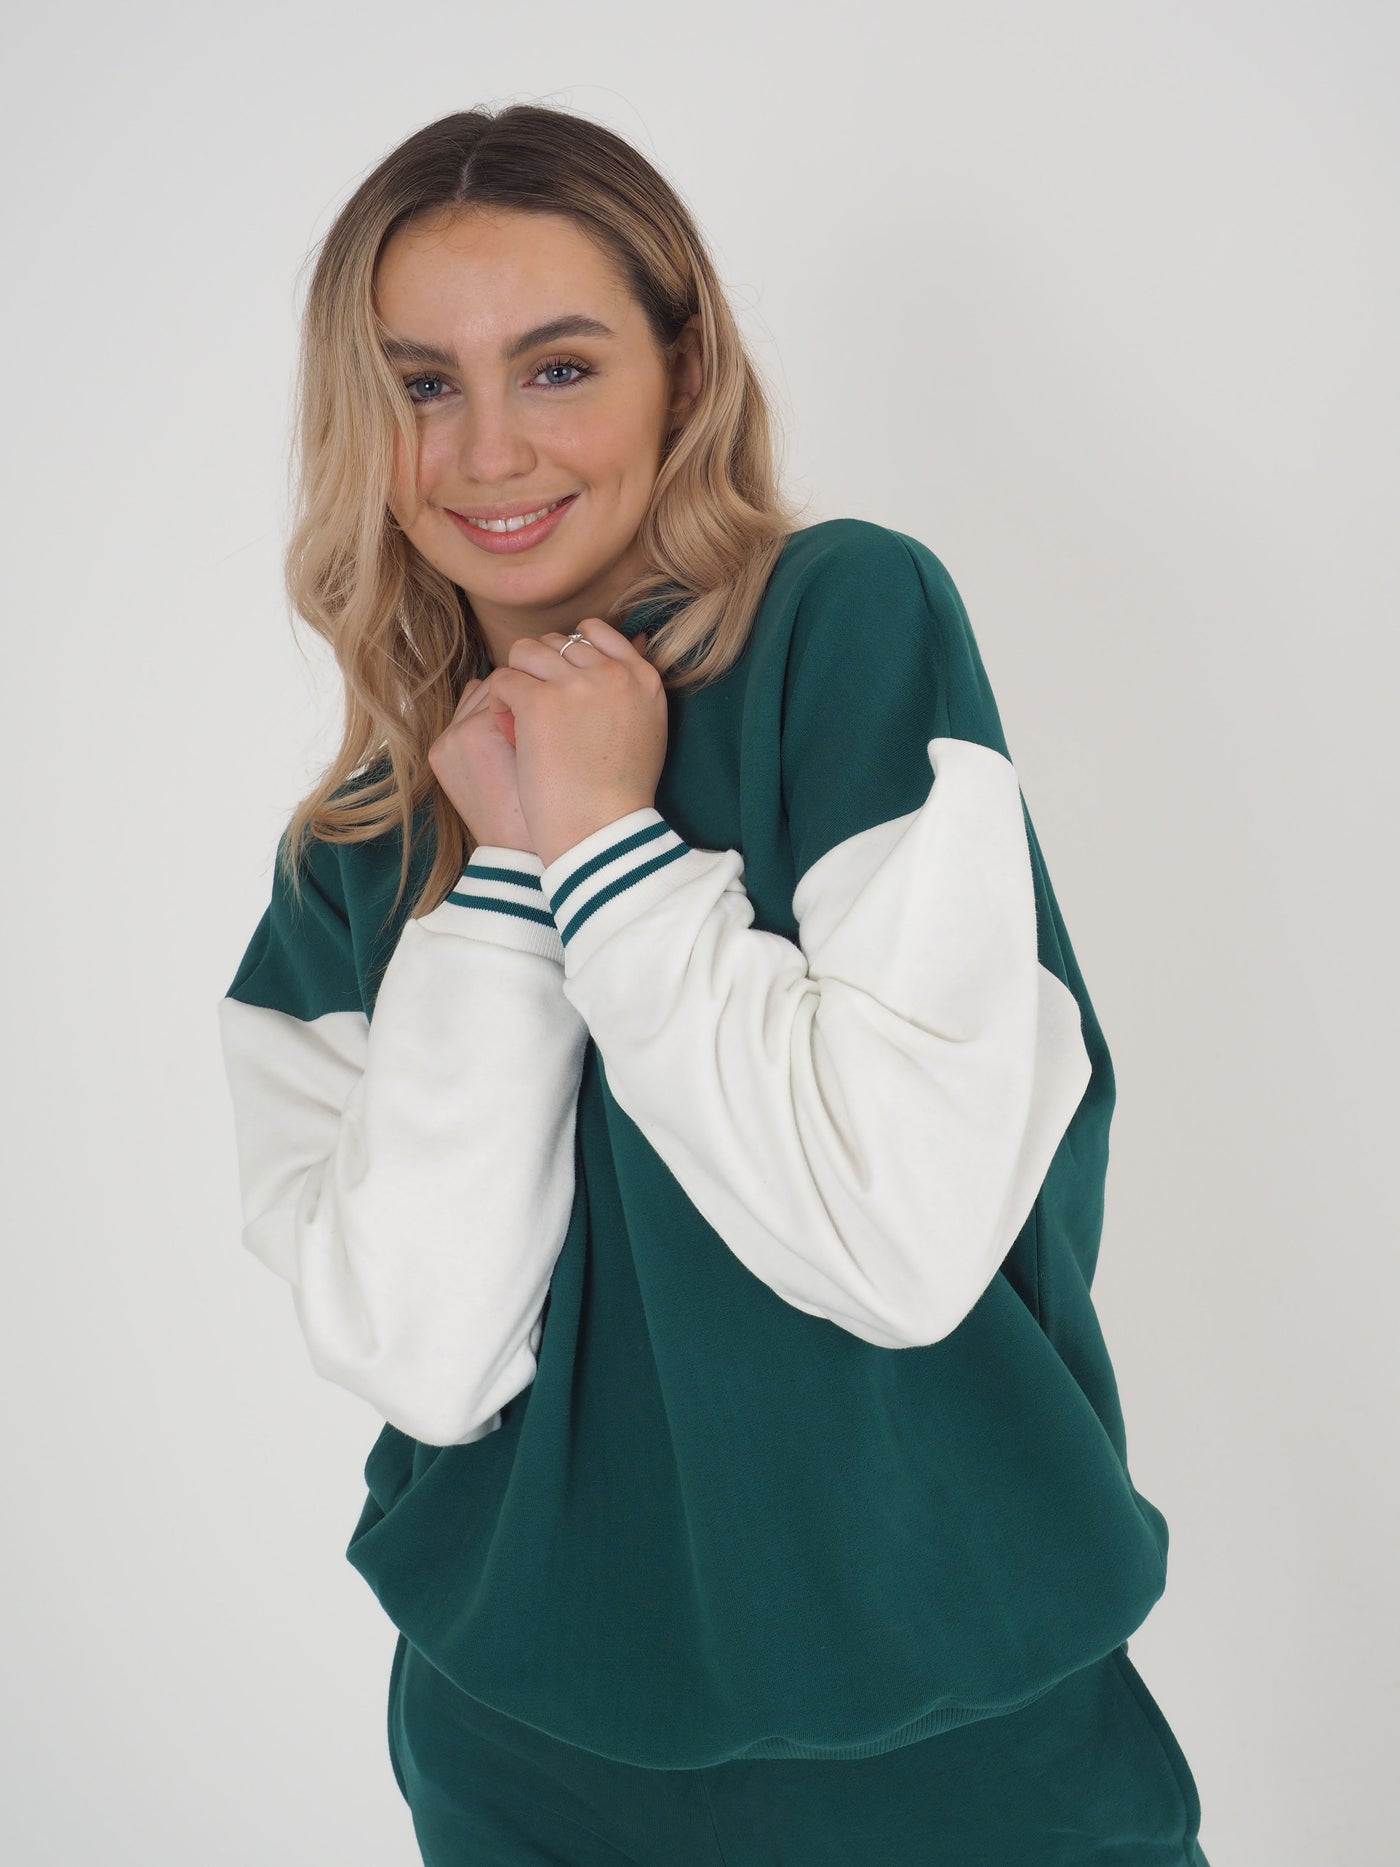 Model with blonde hair wearing a green college varsity style sweatshirt and matching joggers.  Sweatshirt has contrast white sleeves.